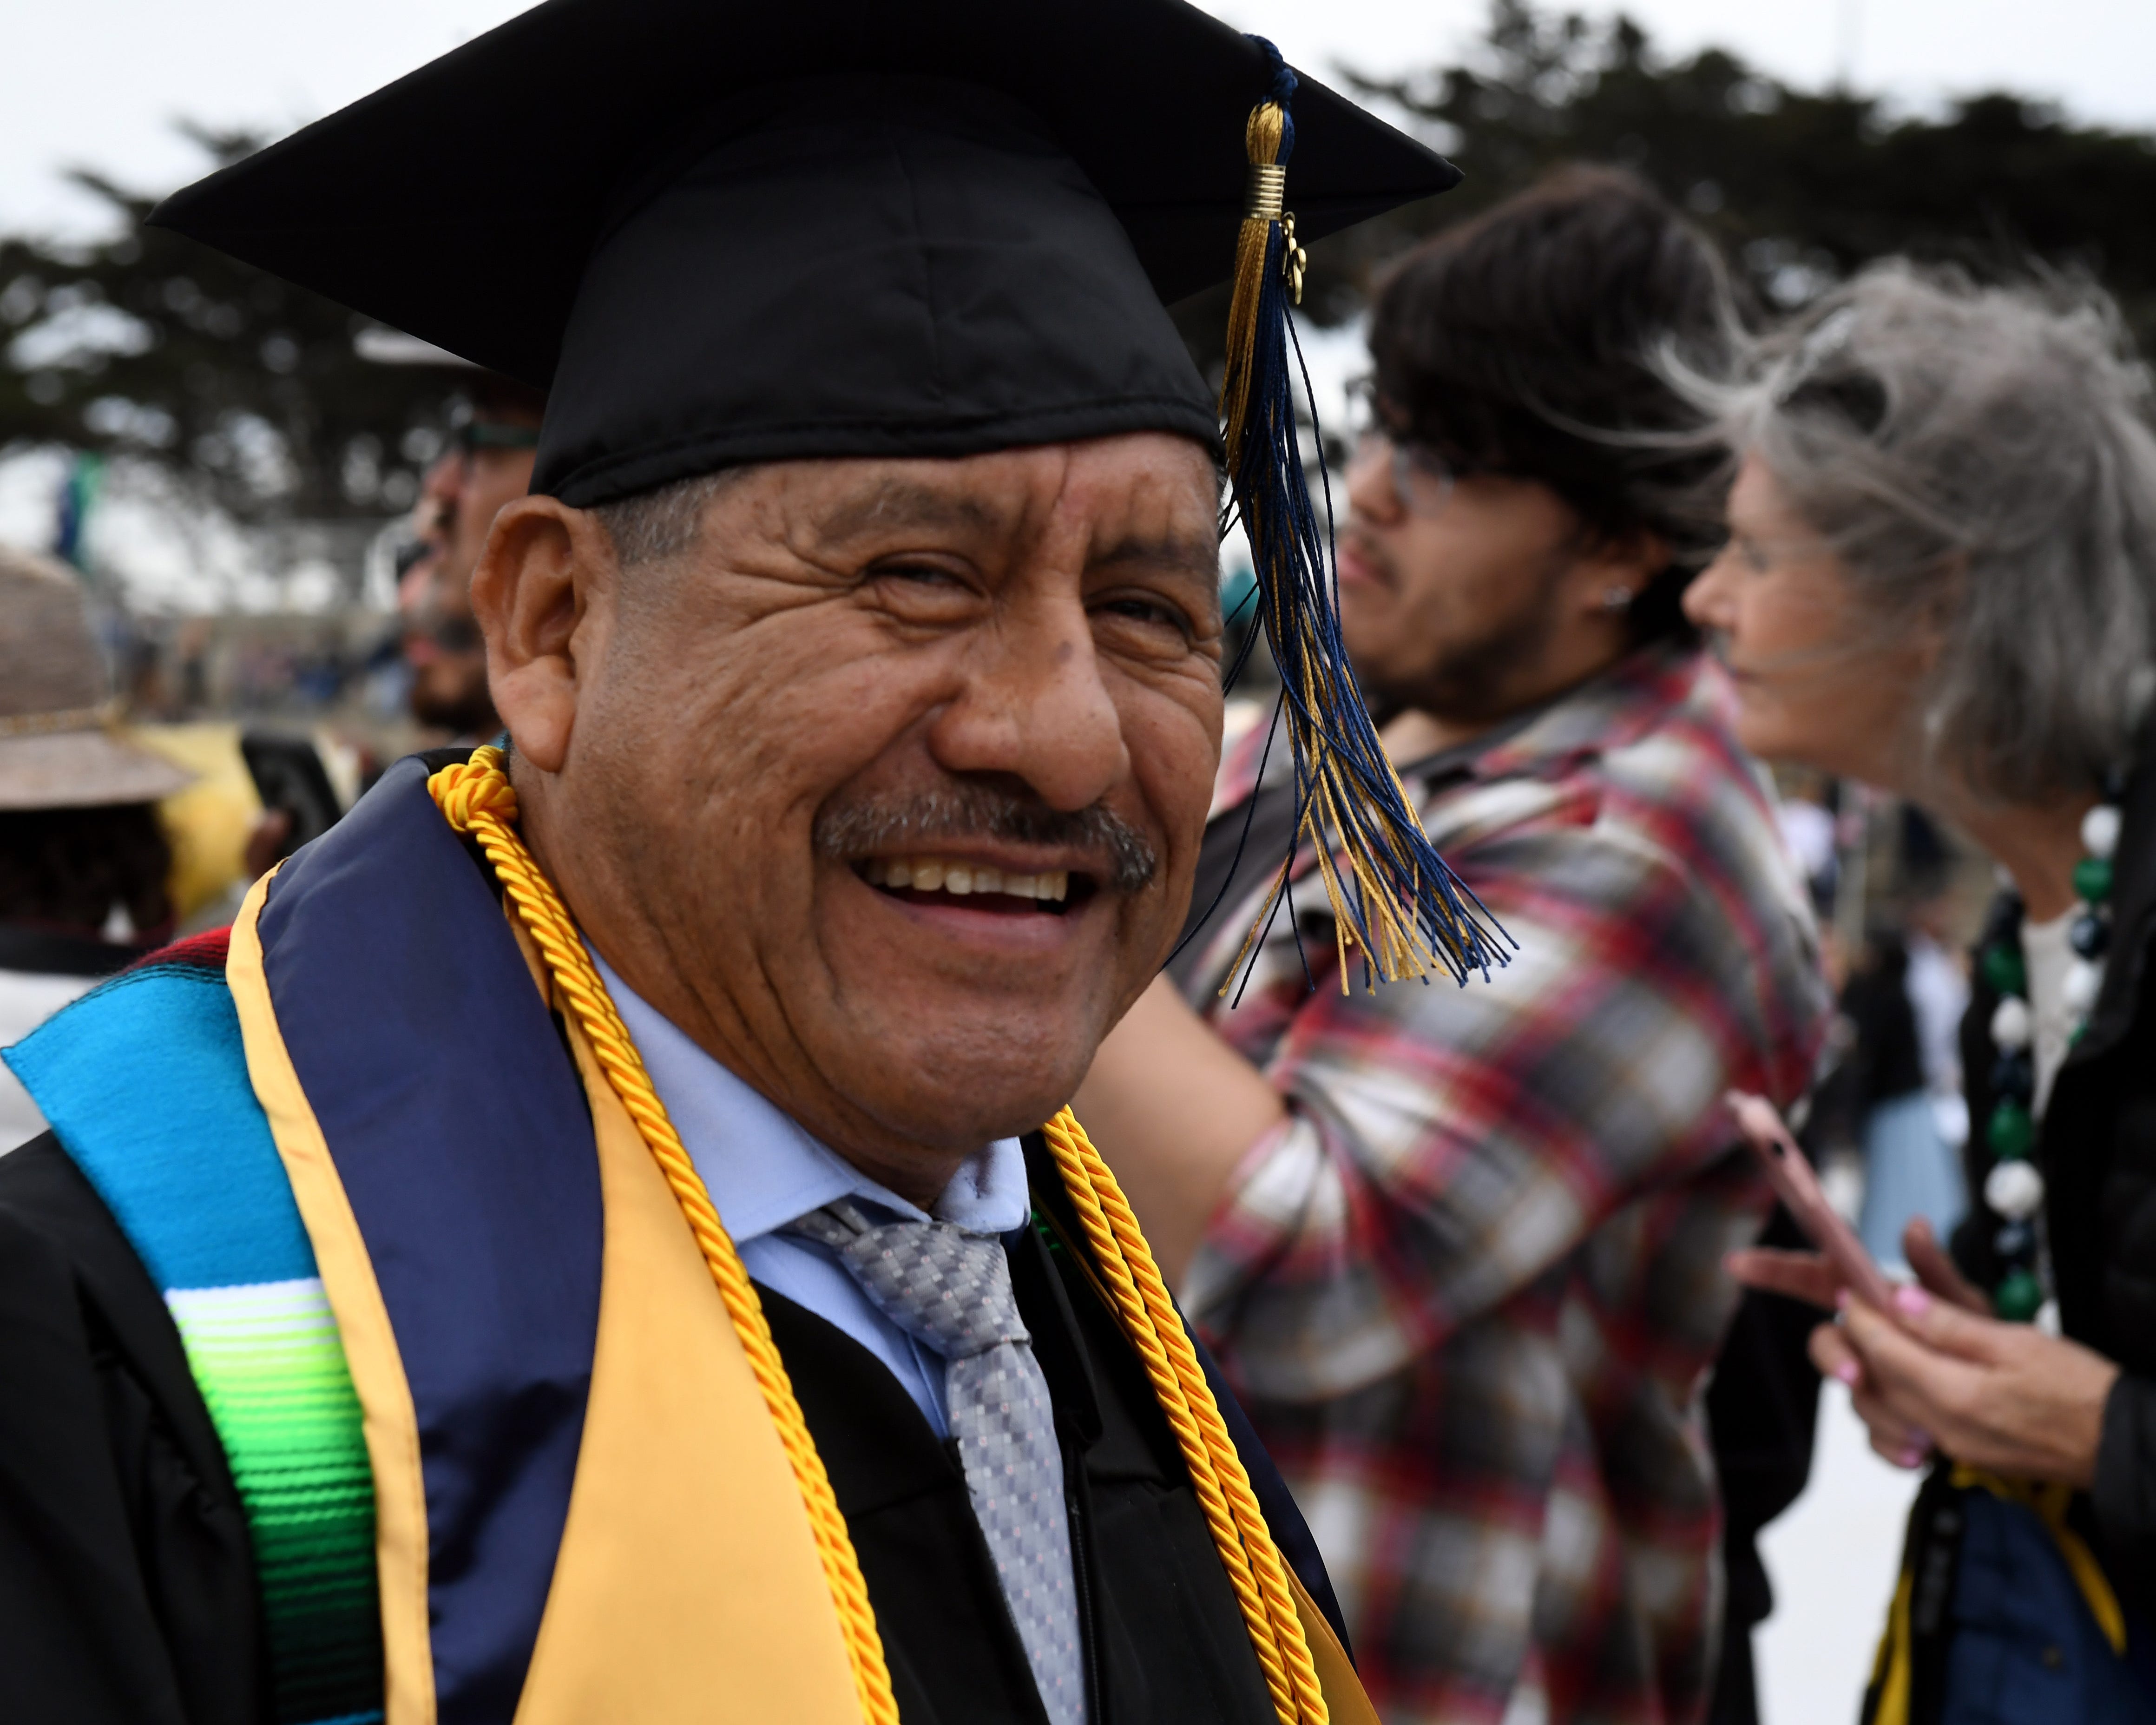 Adolfo González grins for the camera at CSUMB graduation from the College or Arts, Humanities and Social Sciences on Saturday, May 18, 2019.